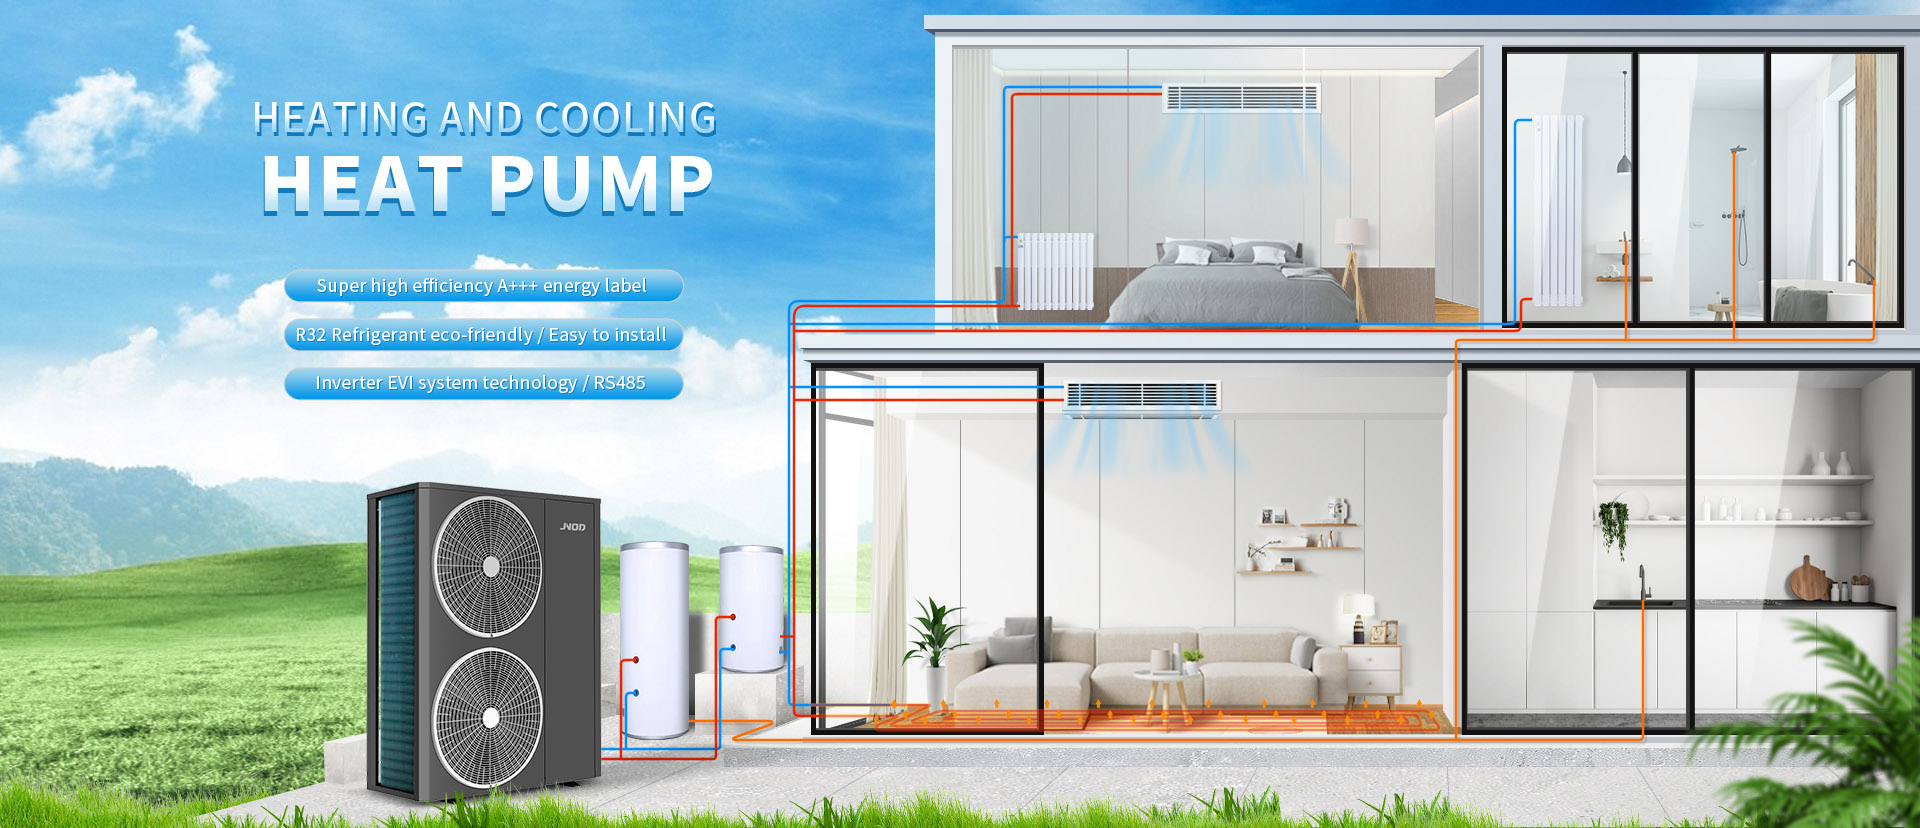 Central Heating And Cooling Heat Pump